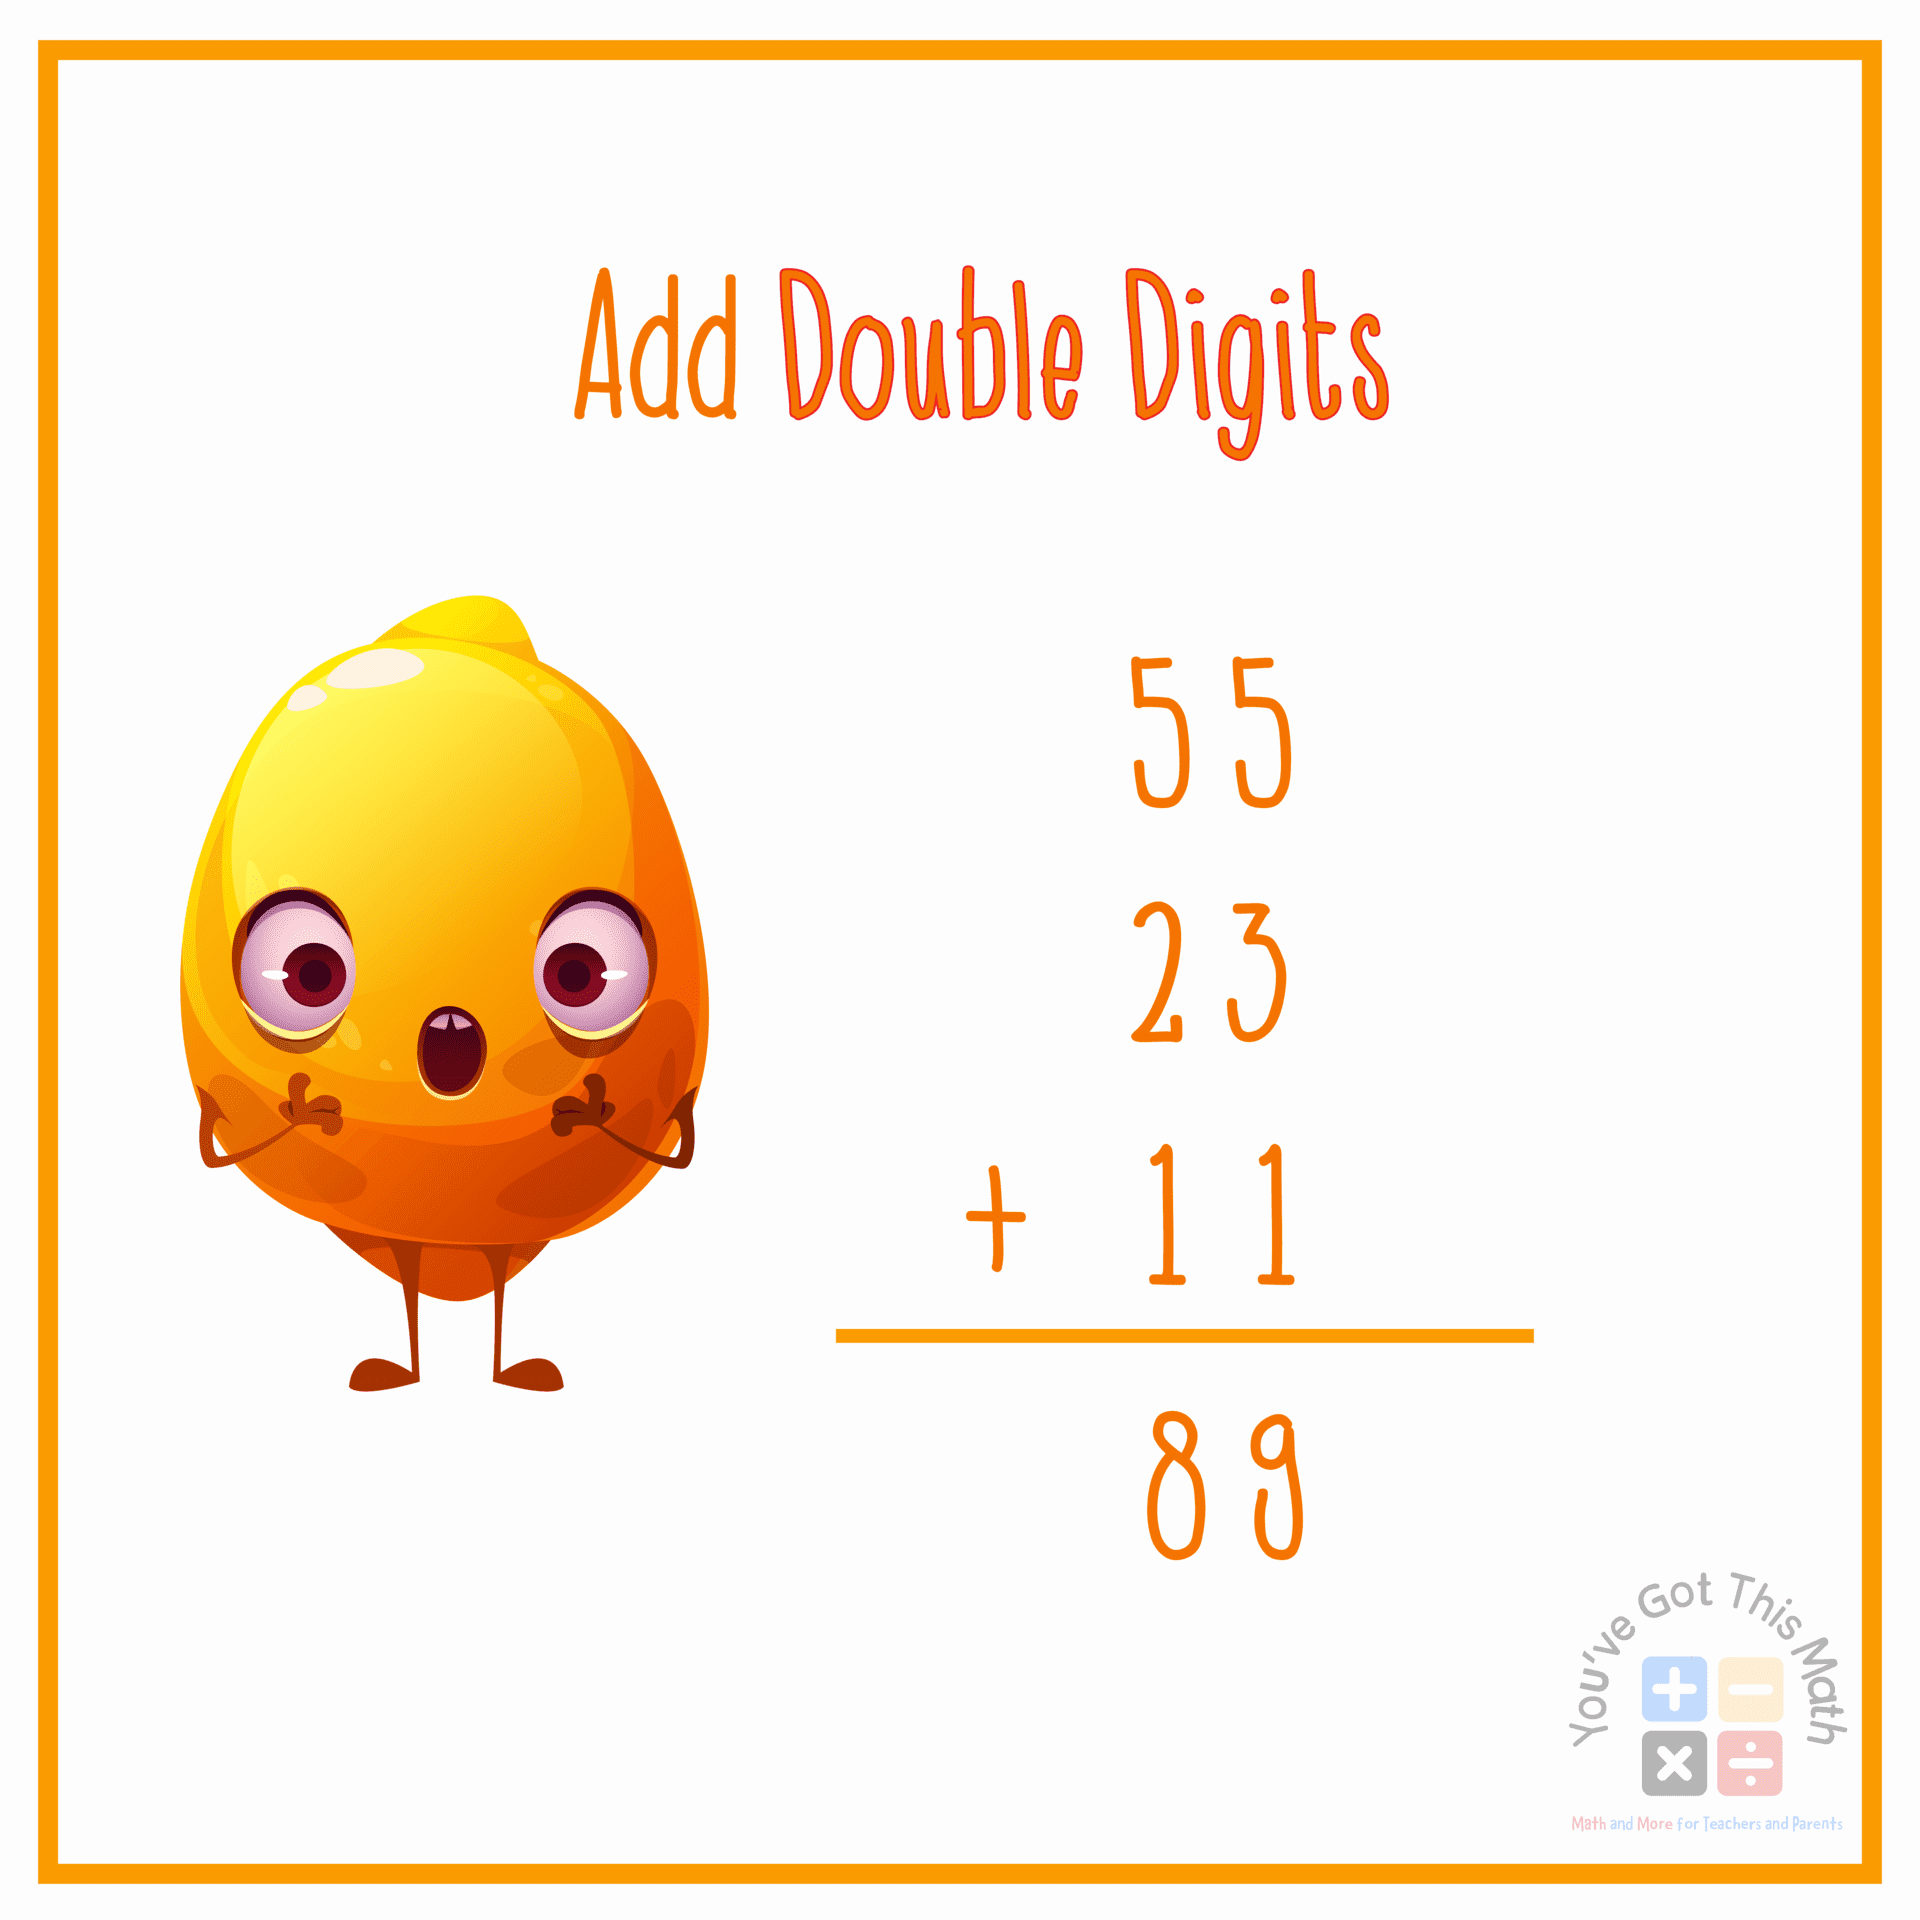 Add double digits for adding with 3 addends